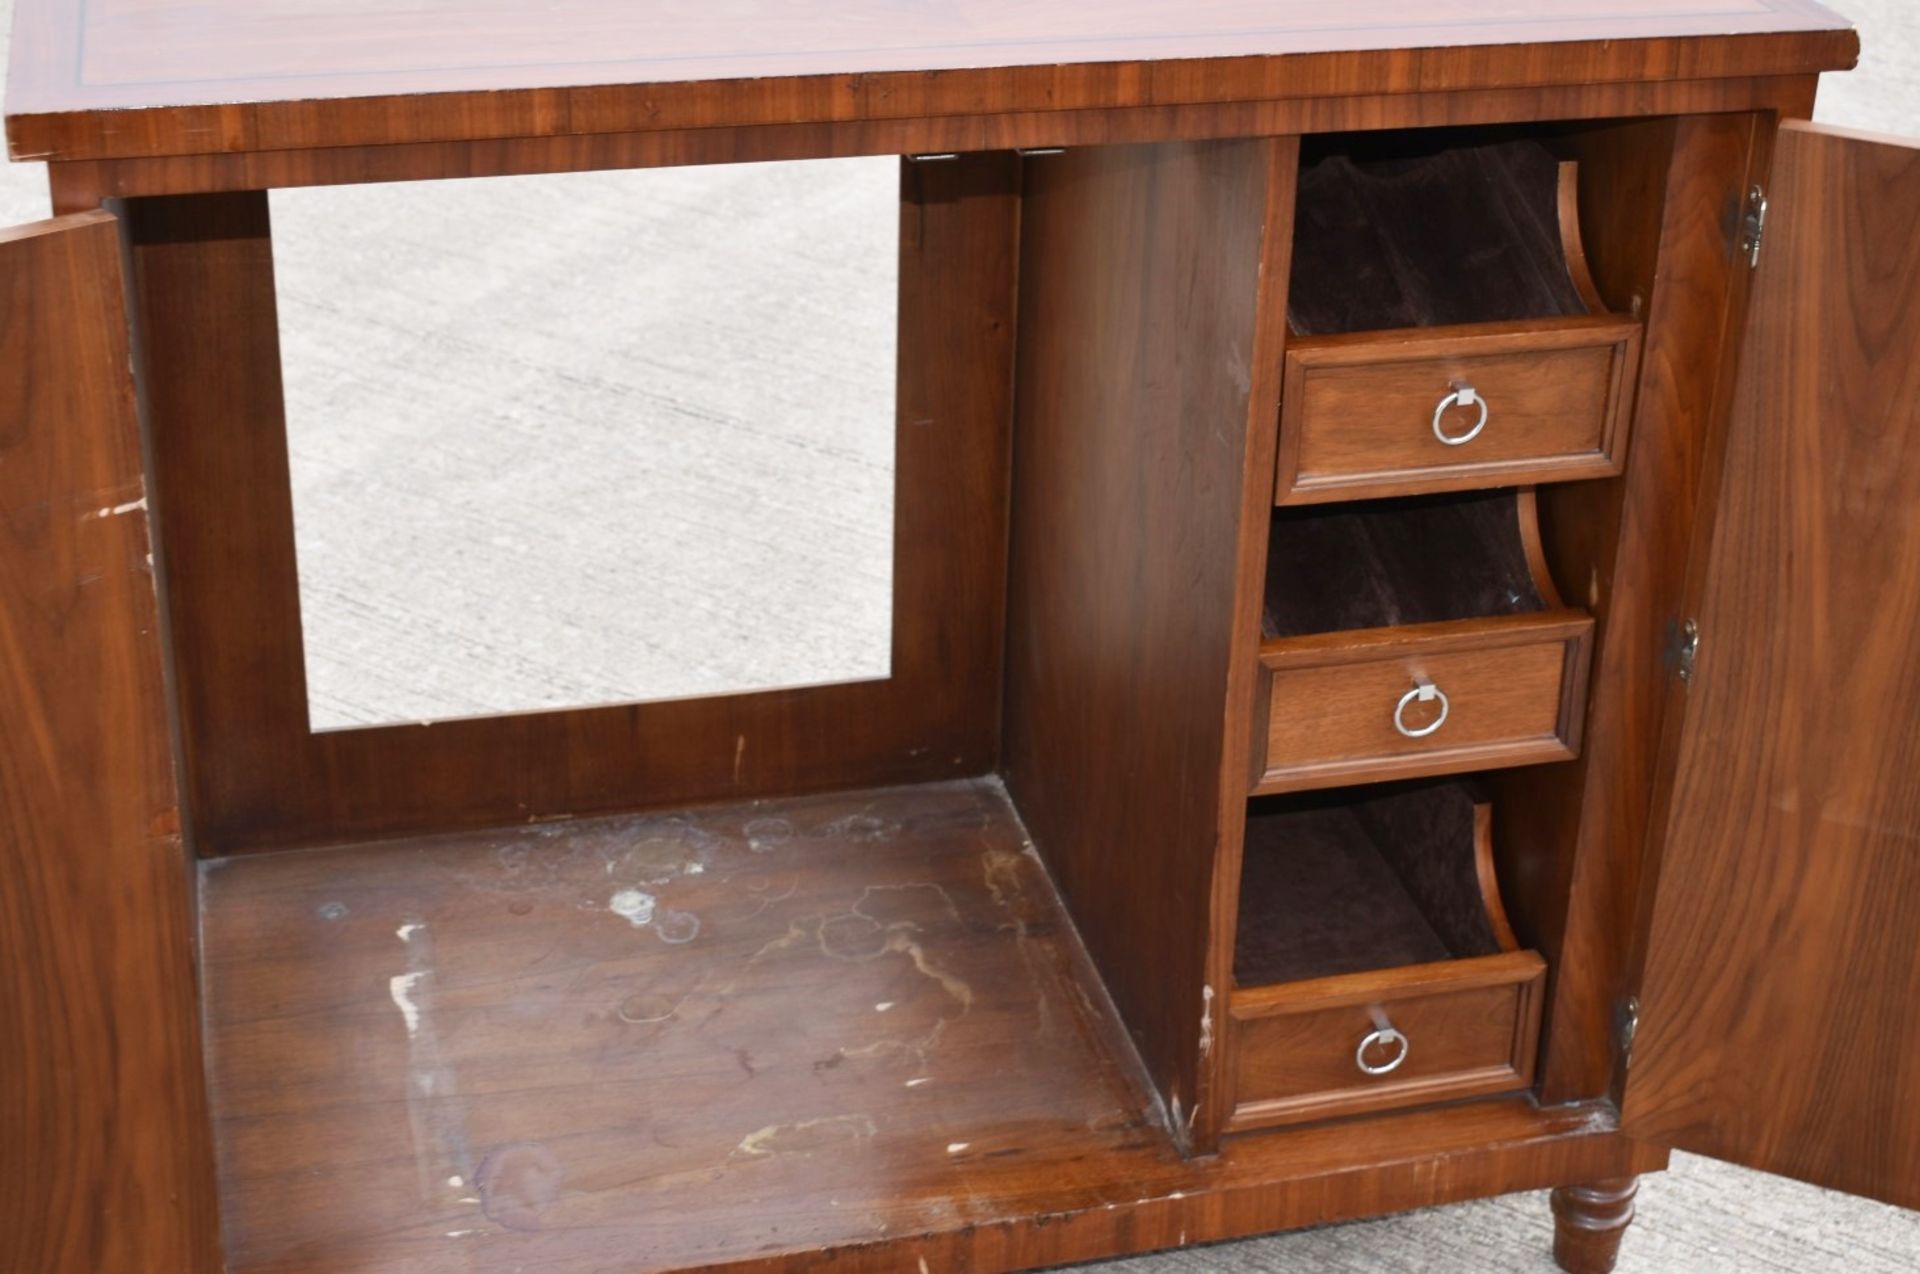 1 x CHANNELS Opulent 2-Door Period-Style Handcrafted Solid Wood Cabinet and 3 x Drawer Storage - Image 4 of 6